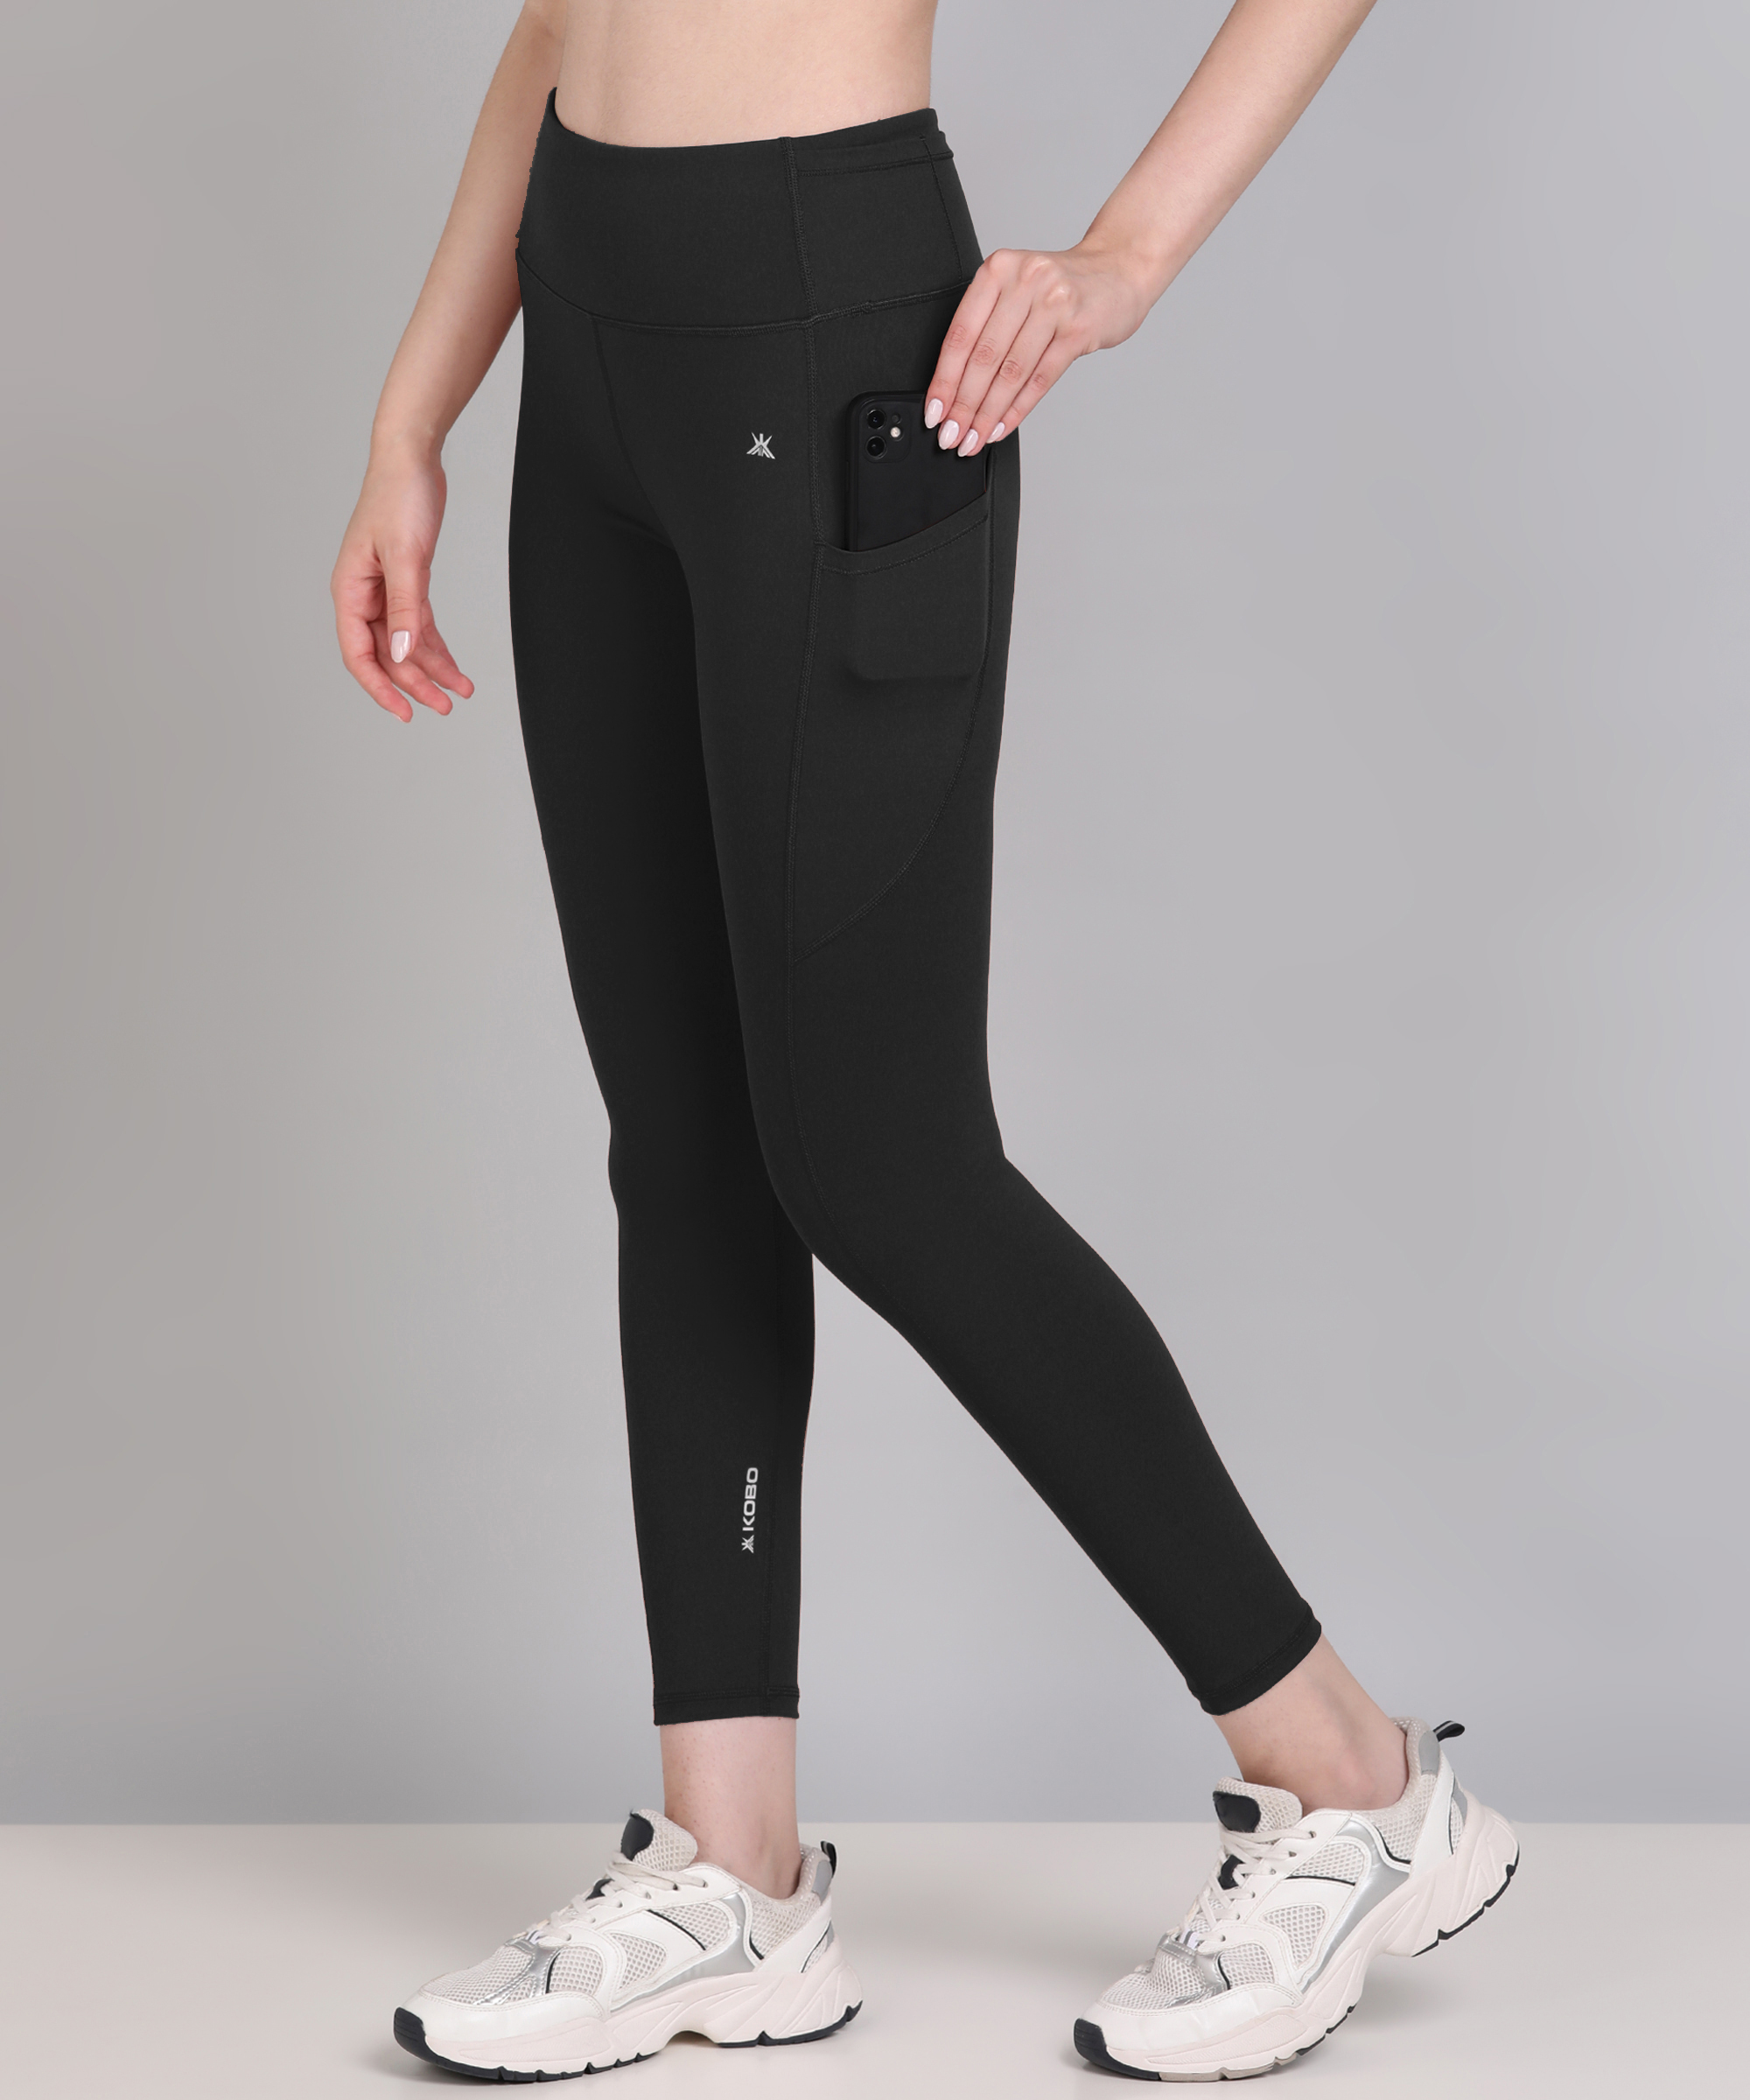 Buy RXRXCOCO Women Crossover Leggings with Pockets High Waisted Athletic  Workout Yoga Pants, 11 Black, Small at Amazon.in